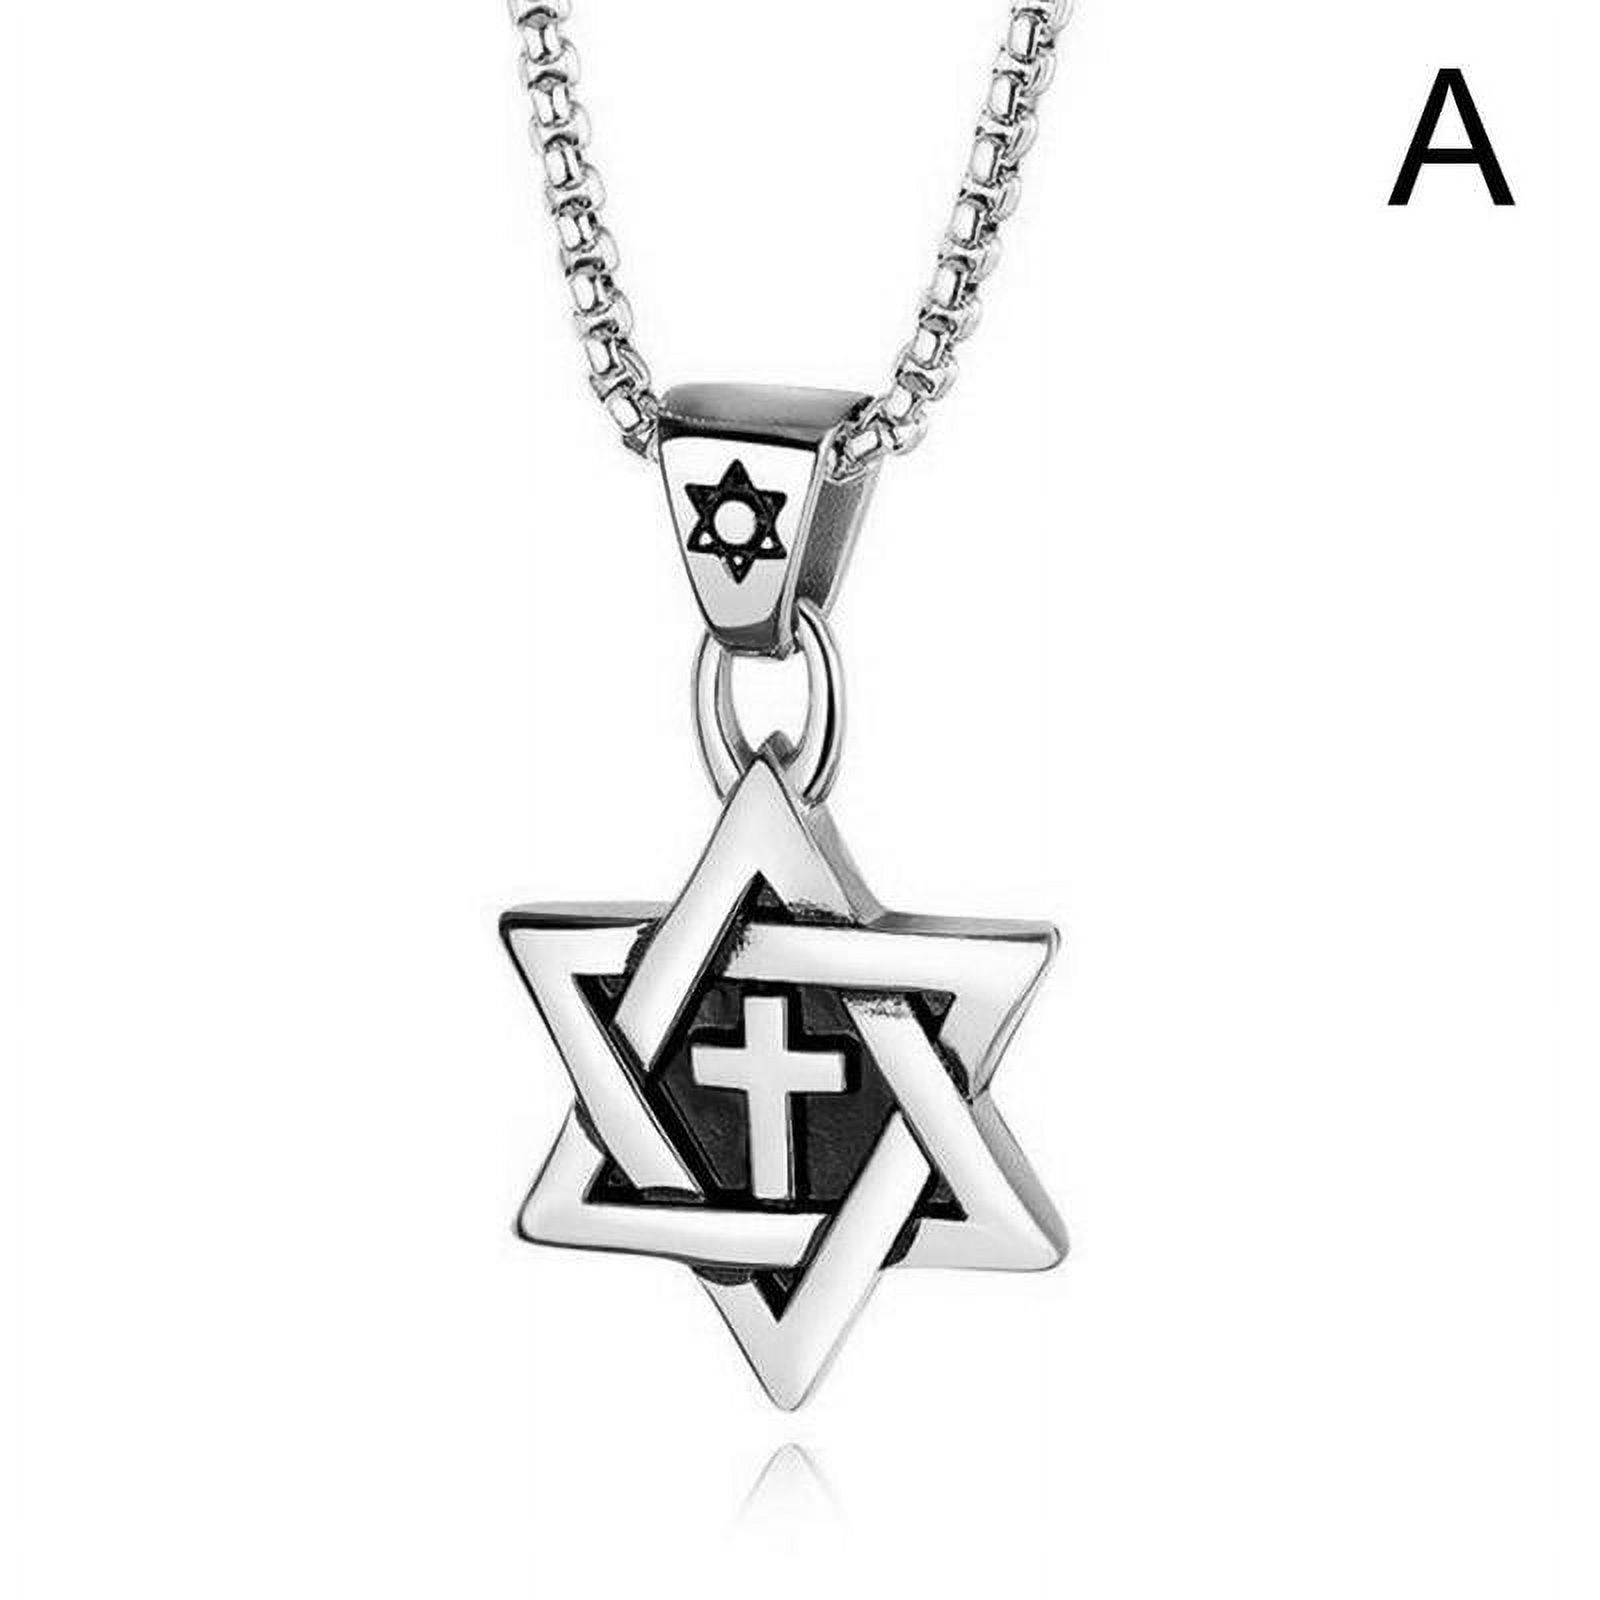 Stainless Steel Star Cross Pendant & Necklace Gold Color Women/Men Chain Israel Jewish Jewelry For Men B6C3 - image 1 of 9